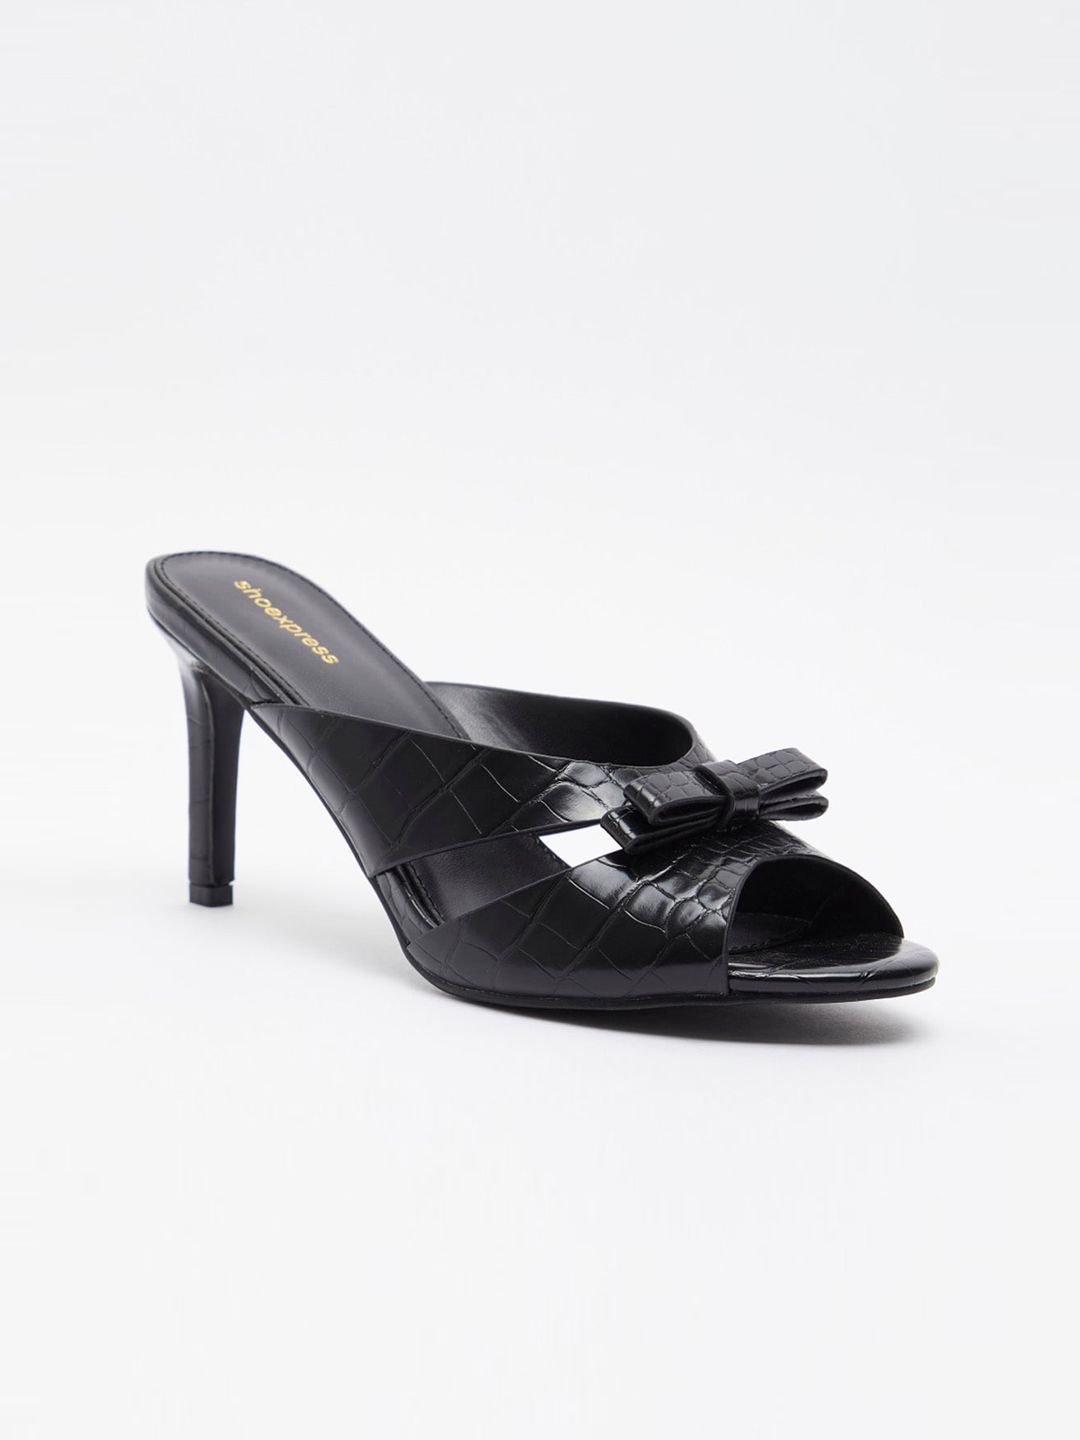 shoexpress Black Textured PU Stiletto Peep Toes With Bows Heel Sandals Price in India